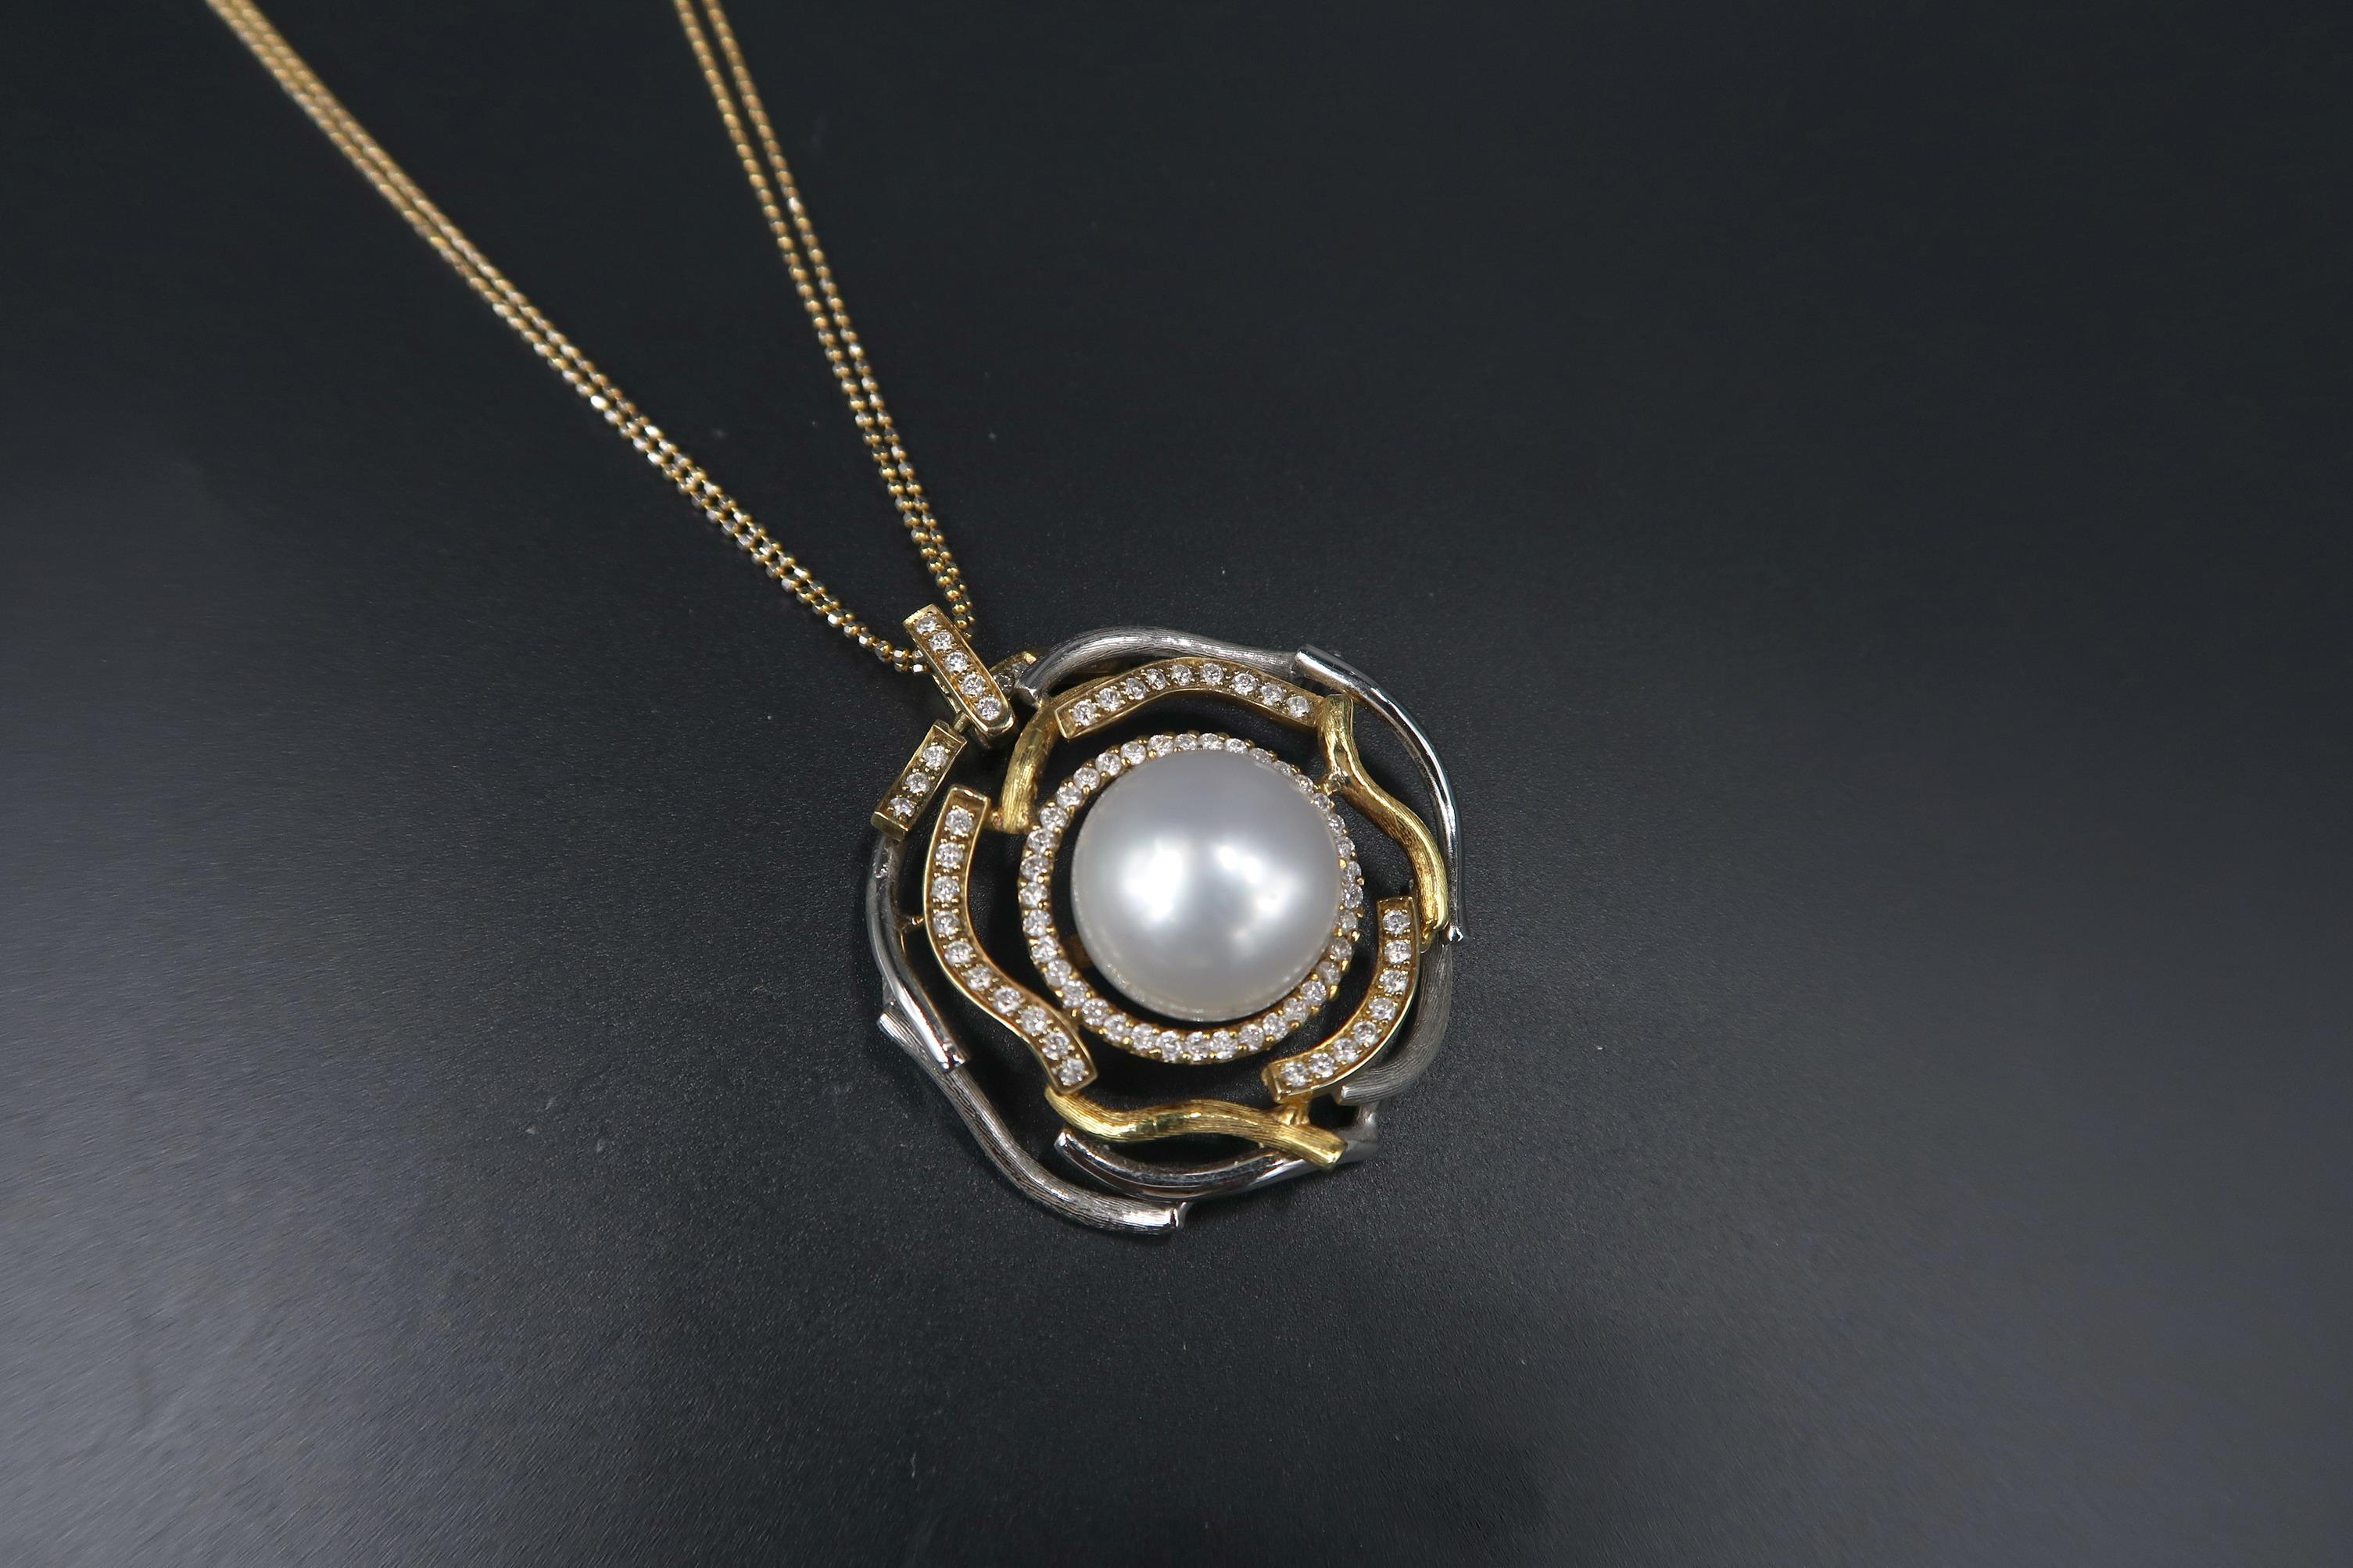 Round-Shaped Wavy Pavé Diamond Halo 2-Coloured Gold Pendant with White South Sea Pearl and Chain in 18K Gold

Pendant
Gold: 18K Gold, 8.982 g
Diamond: 0.81 ct
South Sea Pearl

Chain
Gold: 18K Gold, 4.235 g
Length: 18 inches